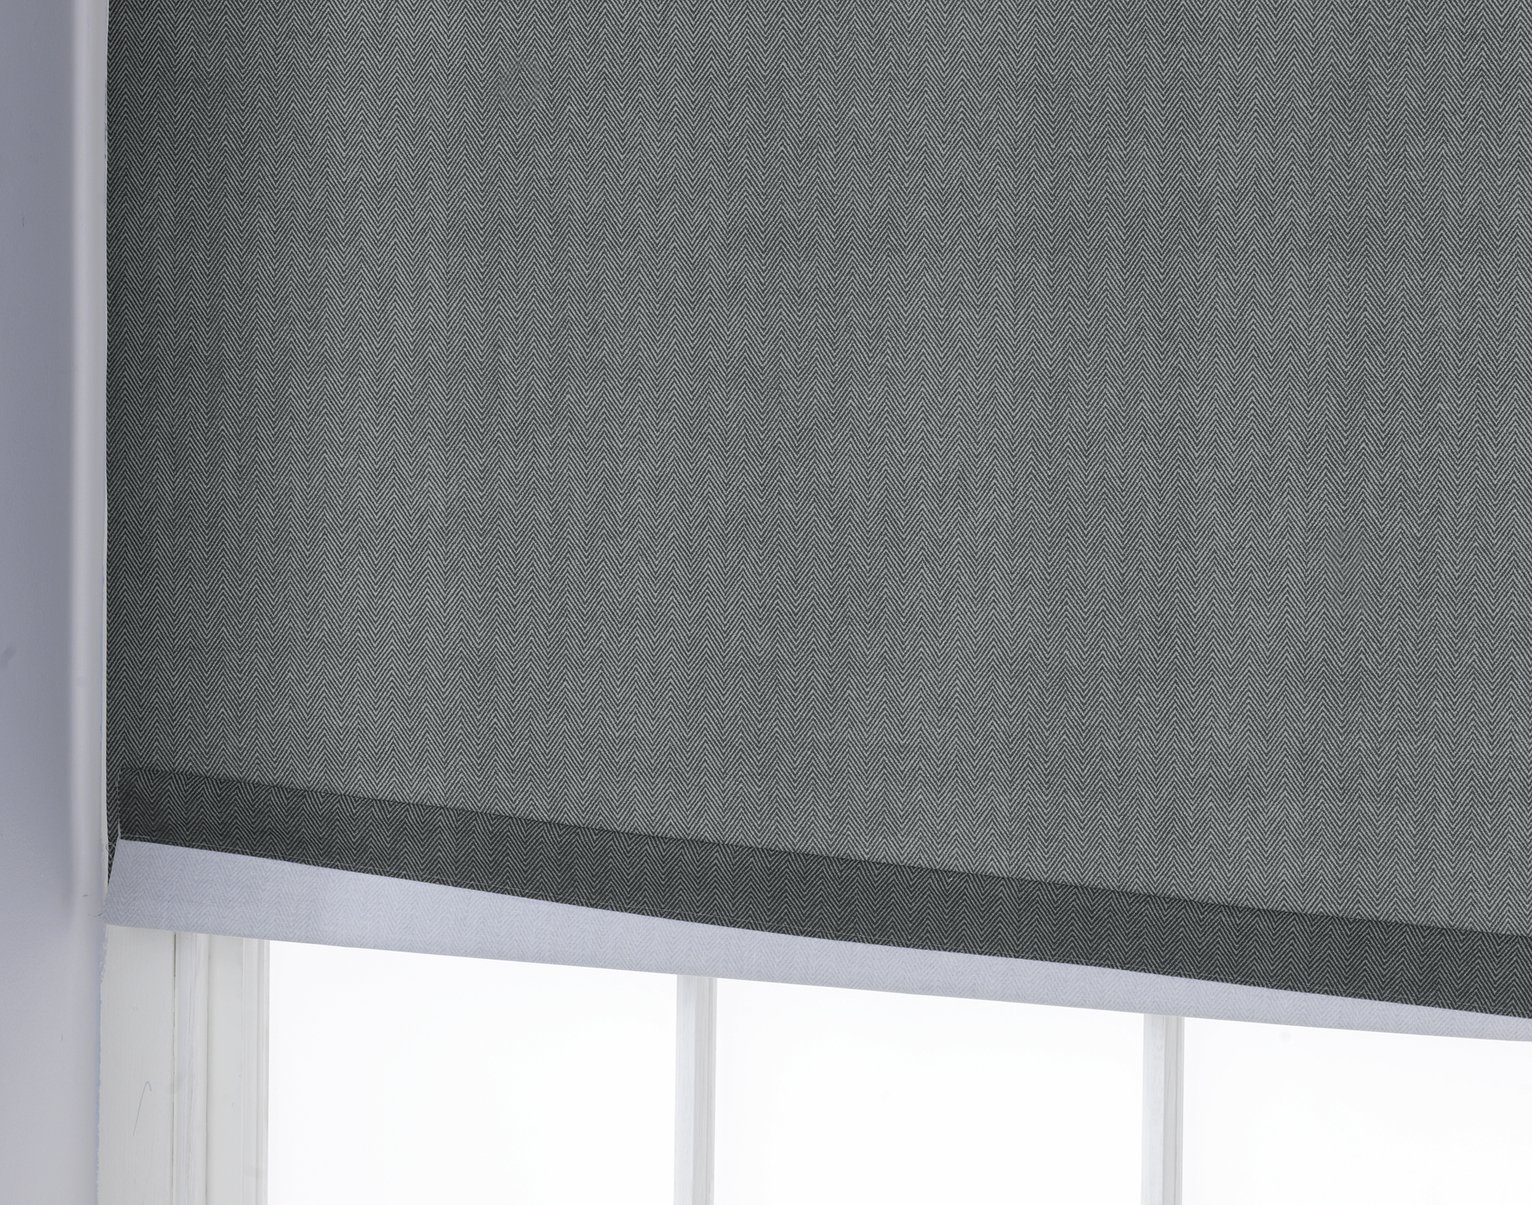 Argos Home Twill Blackout Roller Blind - 4ft - Charcoal